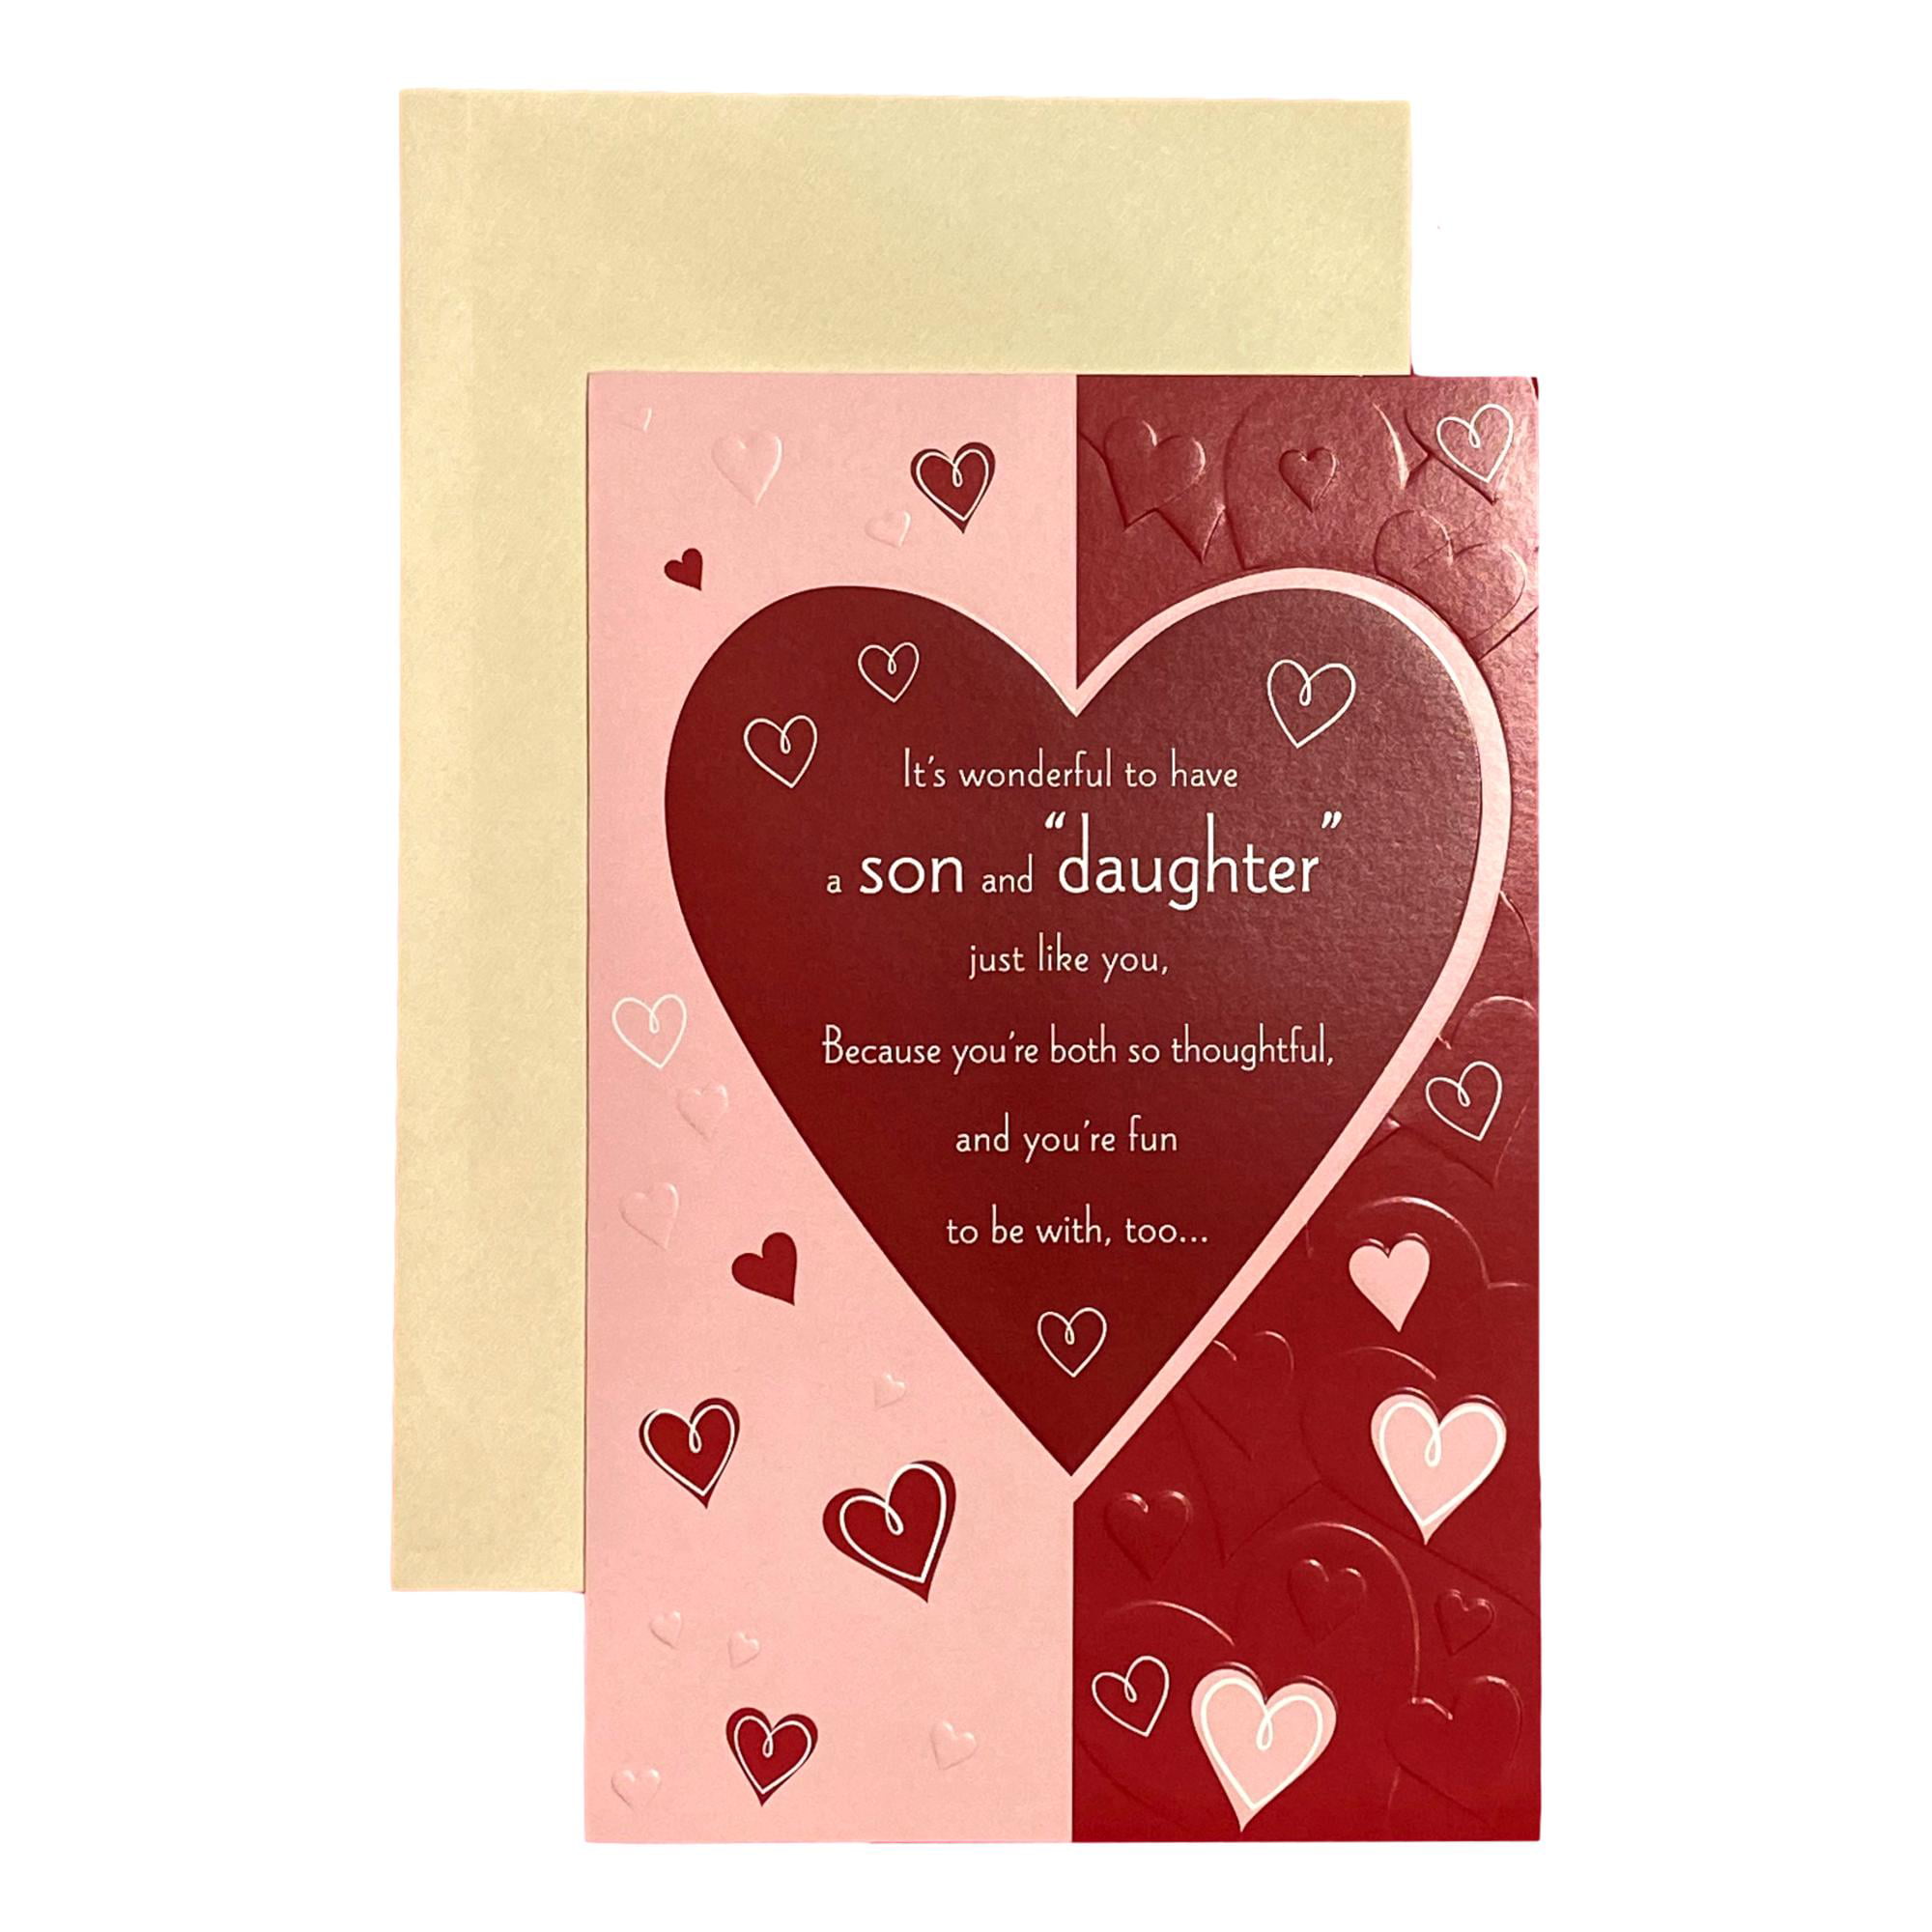 Son To a Special Son and Daughter with Valentine's Day Greeting Card for Wife 